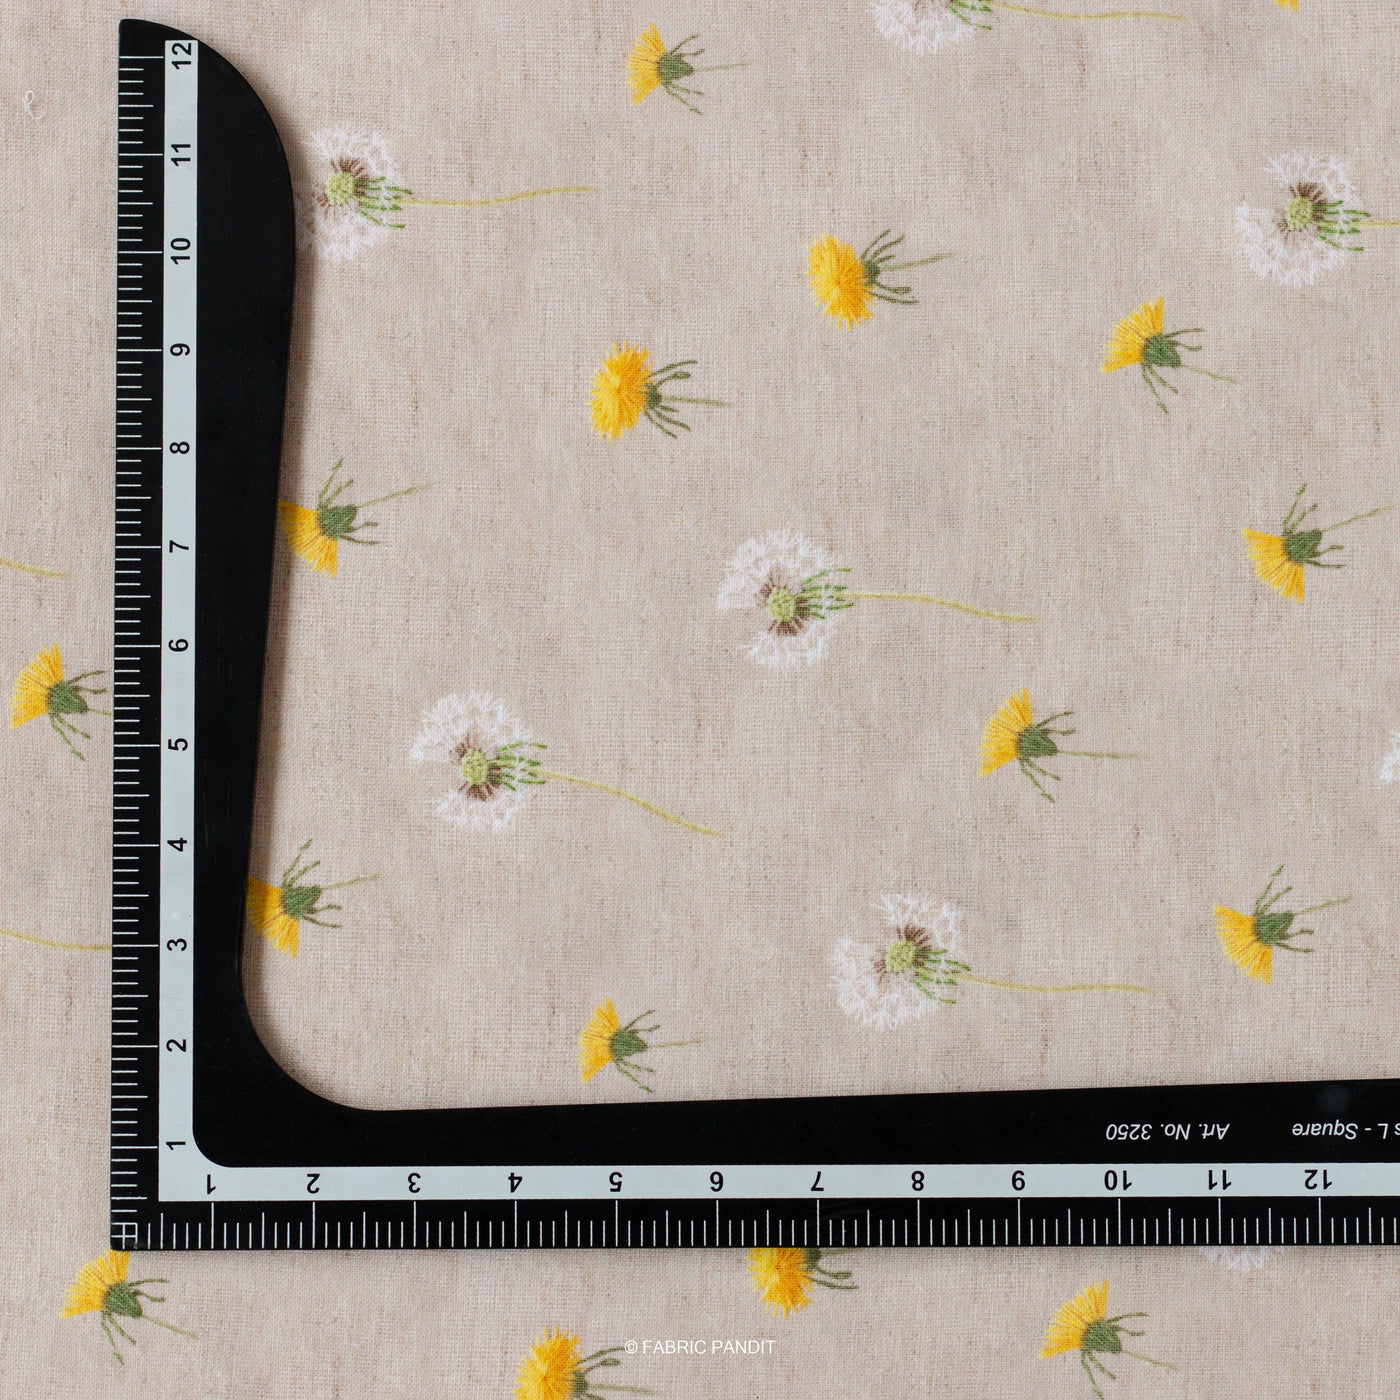 Fabric Pandit Cut Piece 0.25M (CUT PIECE) Yellow And White Pollen Flower Digital Printed Linen Neps Fabric (Width 44 Inches)